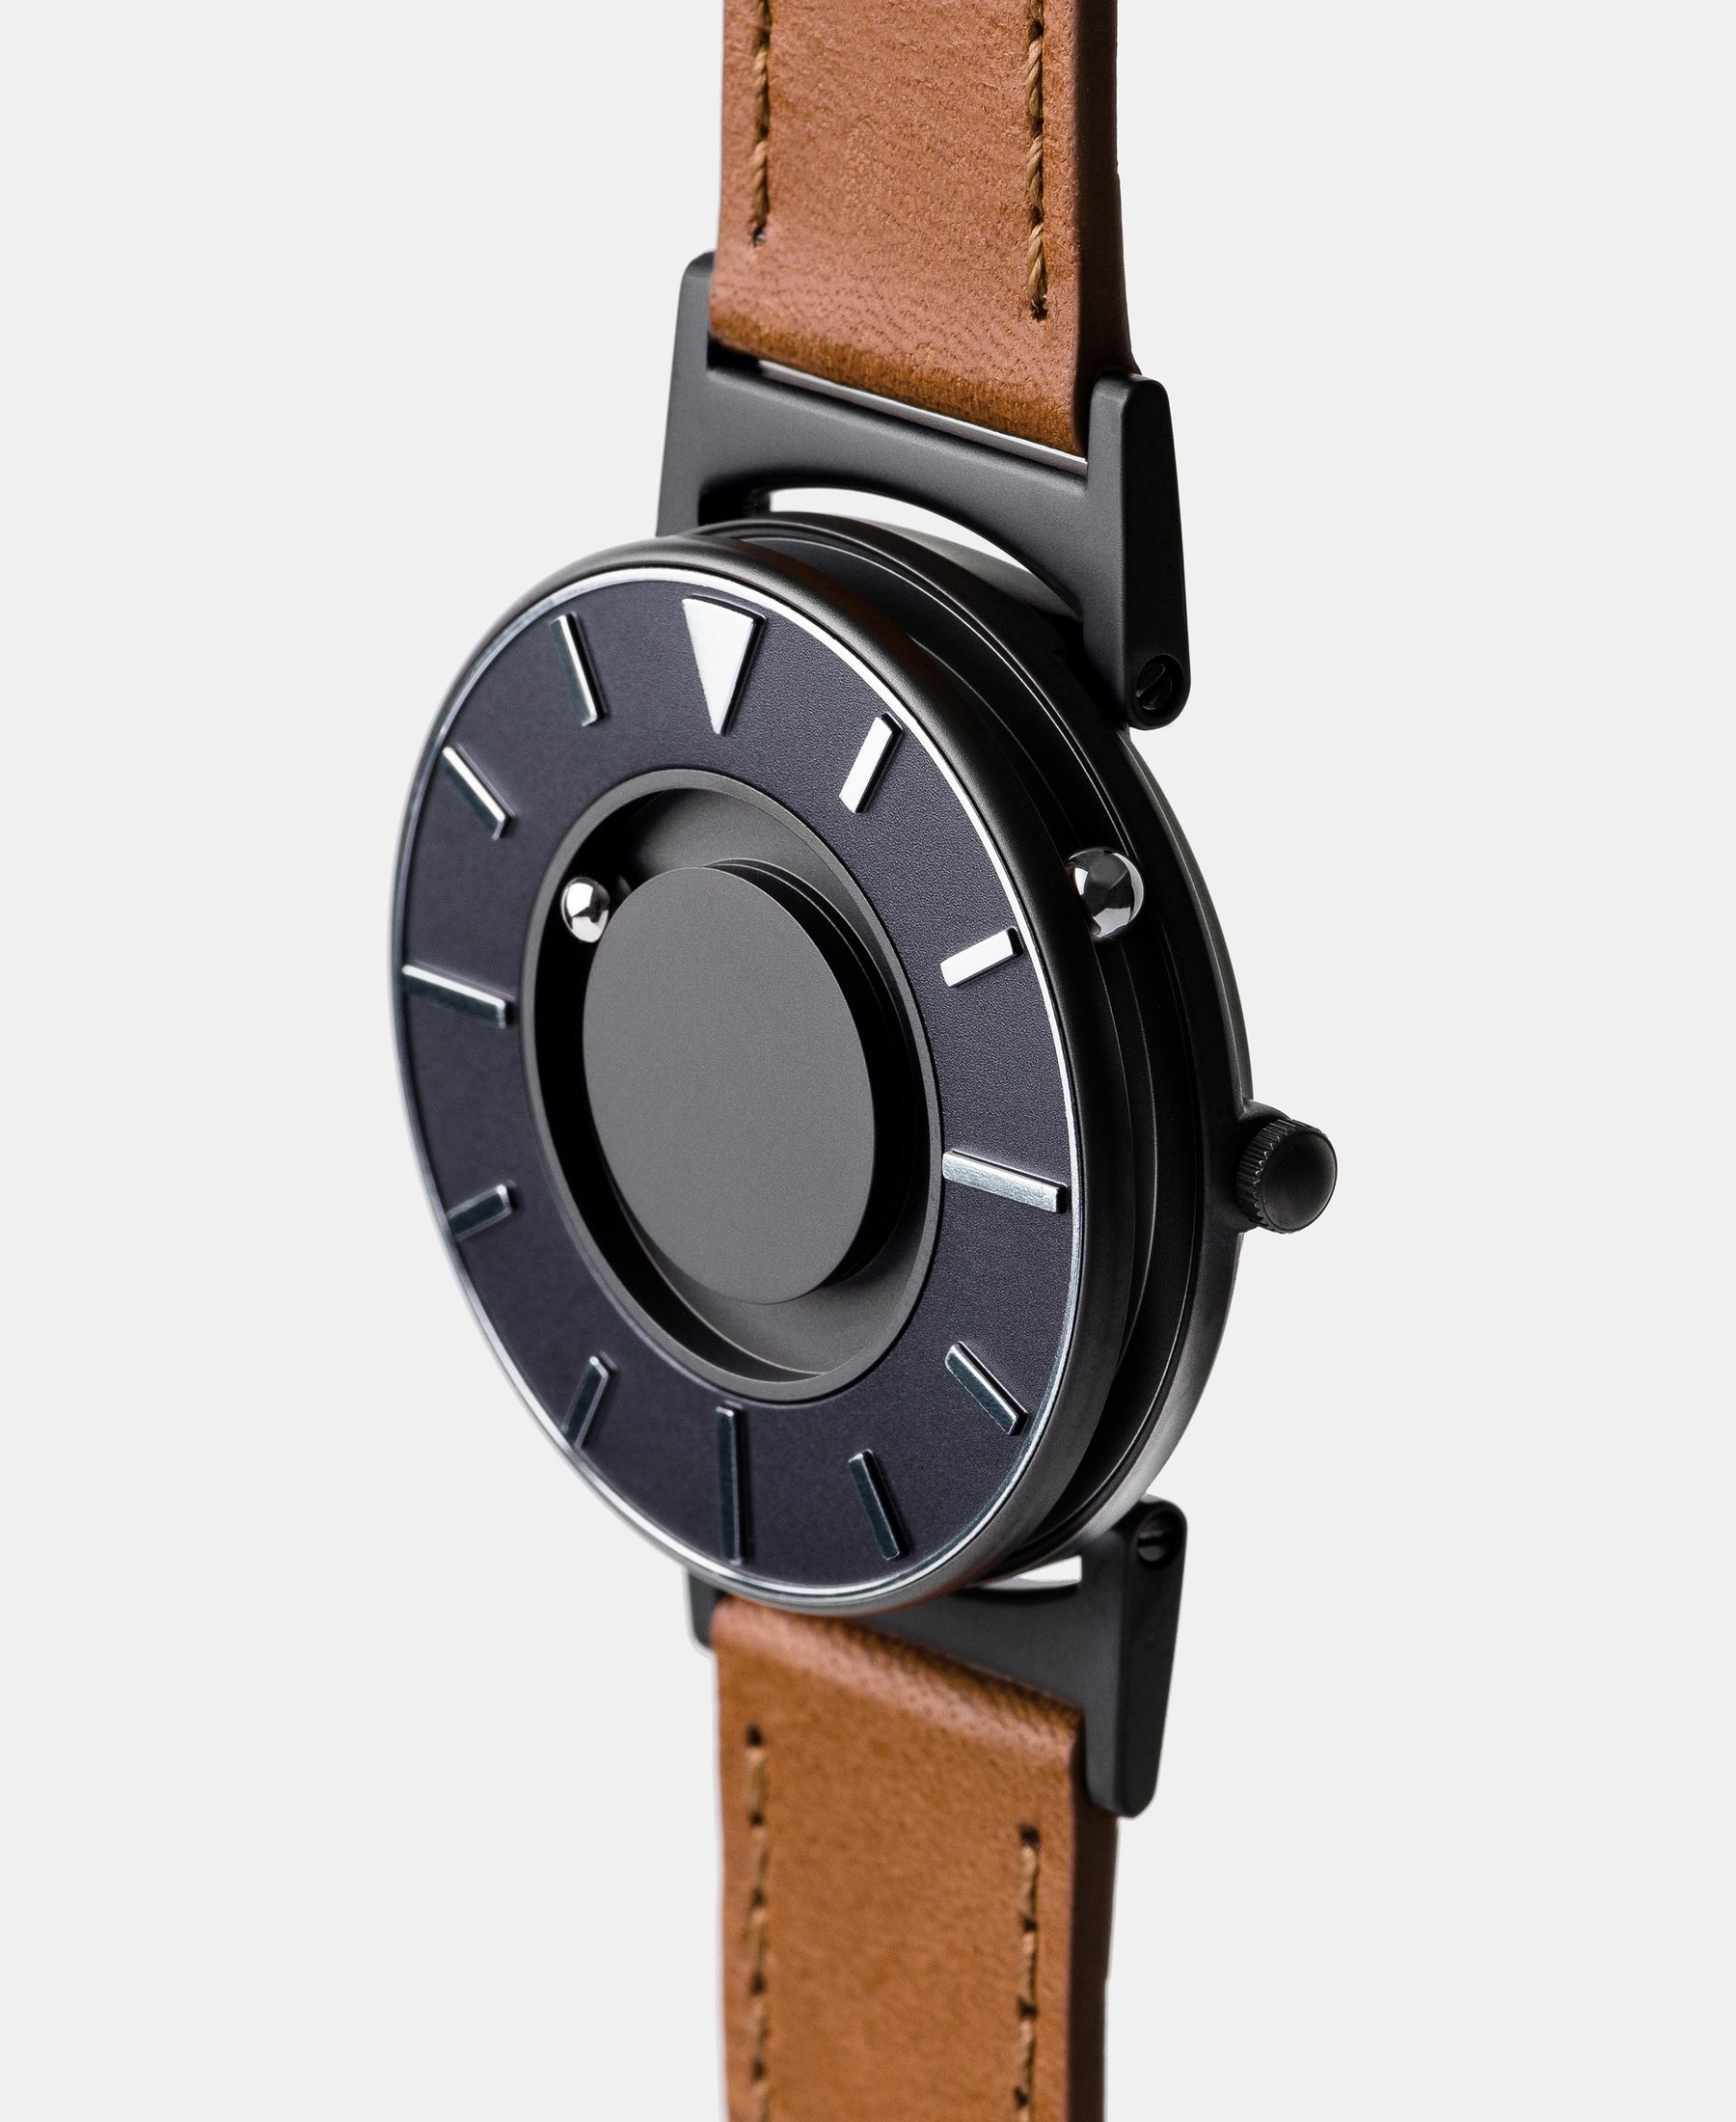 Load image into Gallery viewer, A photo of the watch from a side angle. The recessed track around the outside of the watch face is shown with the hour ball bearing in the track. The raised markers are noticeable from this perspective.